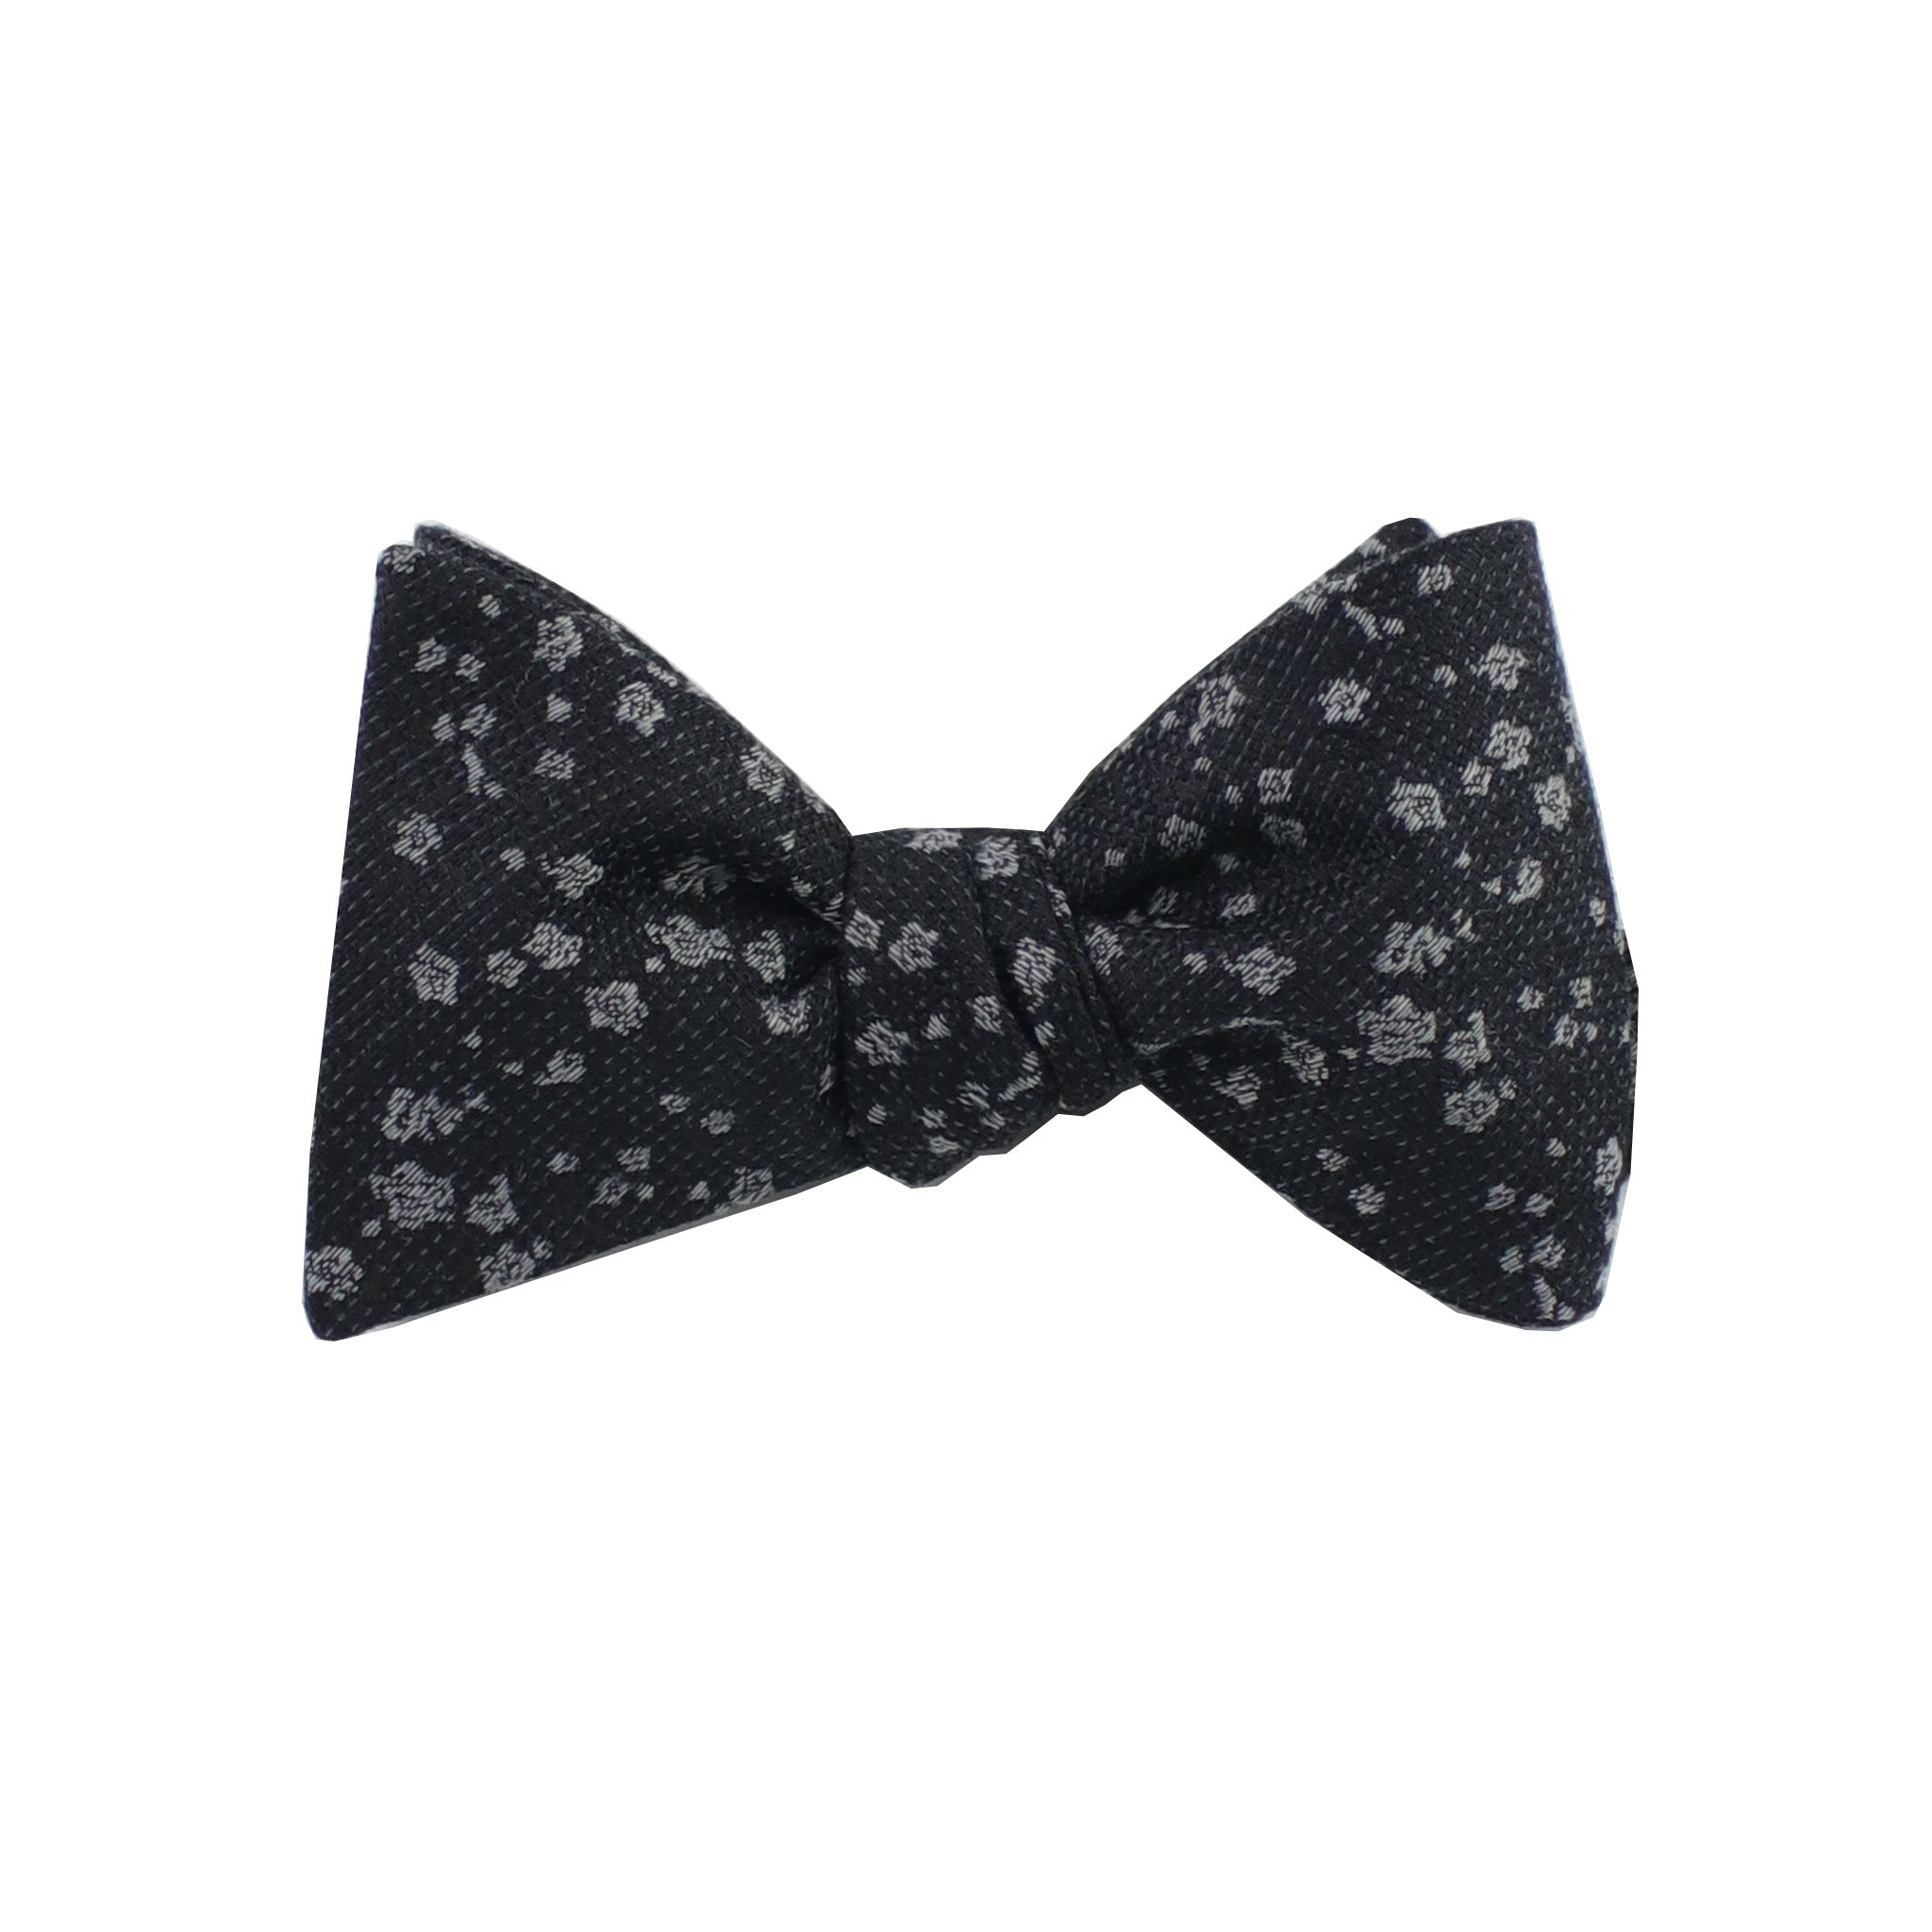 Black & Silver Floral Self Tie Bow Tie from DIBI